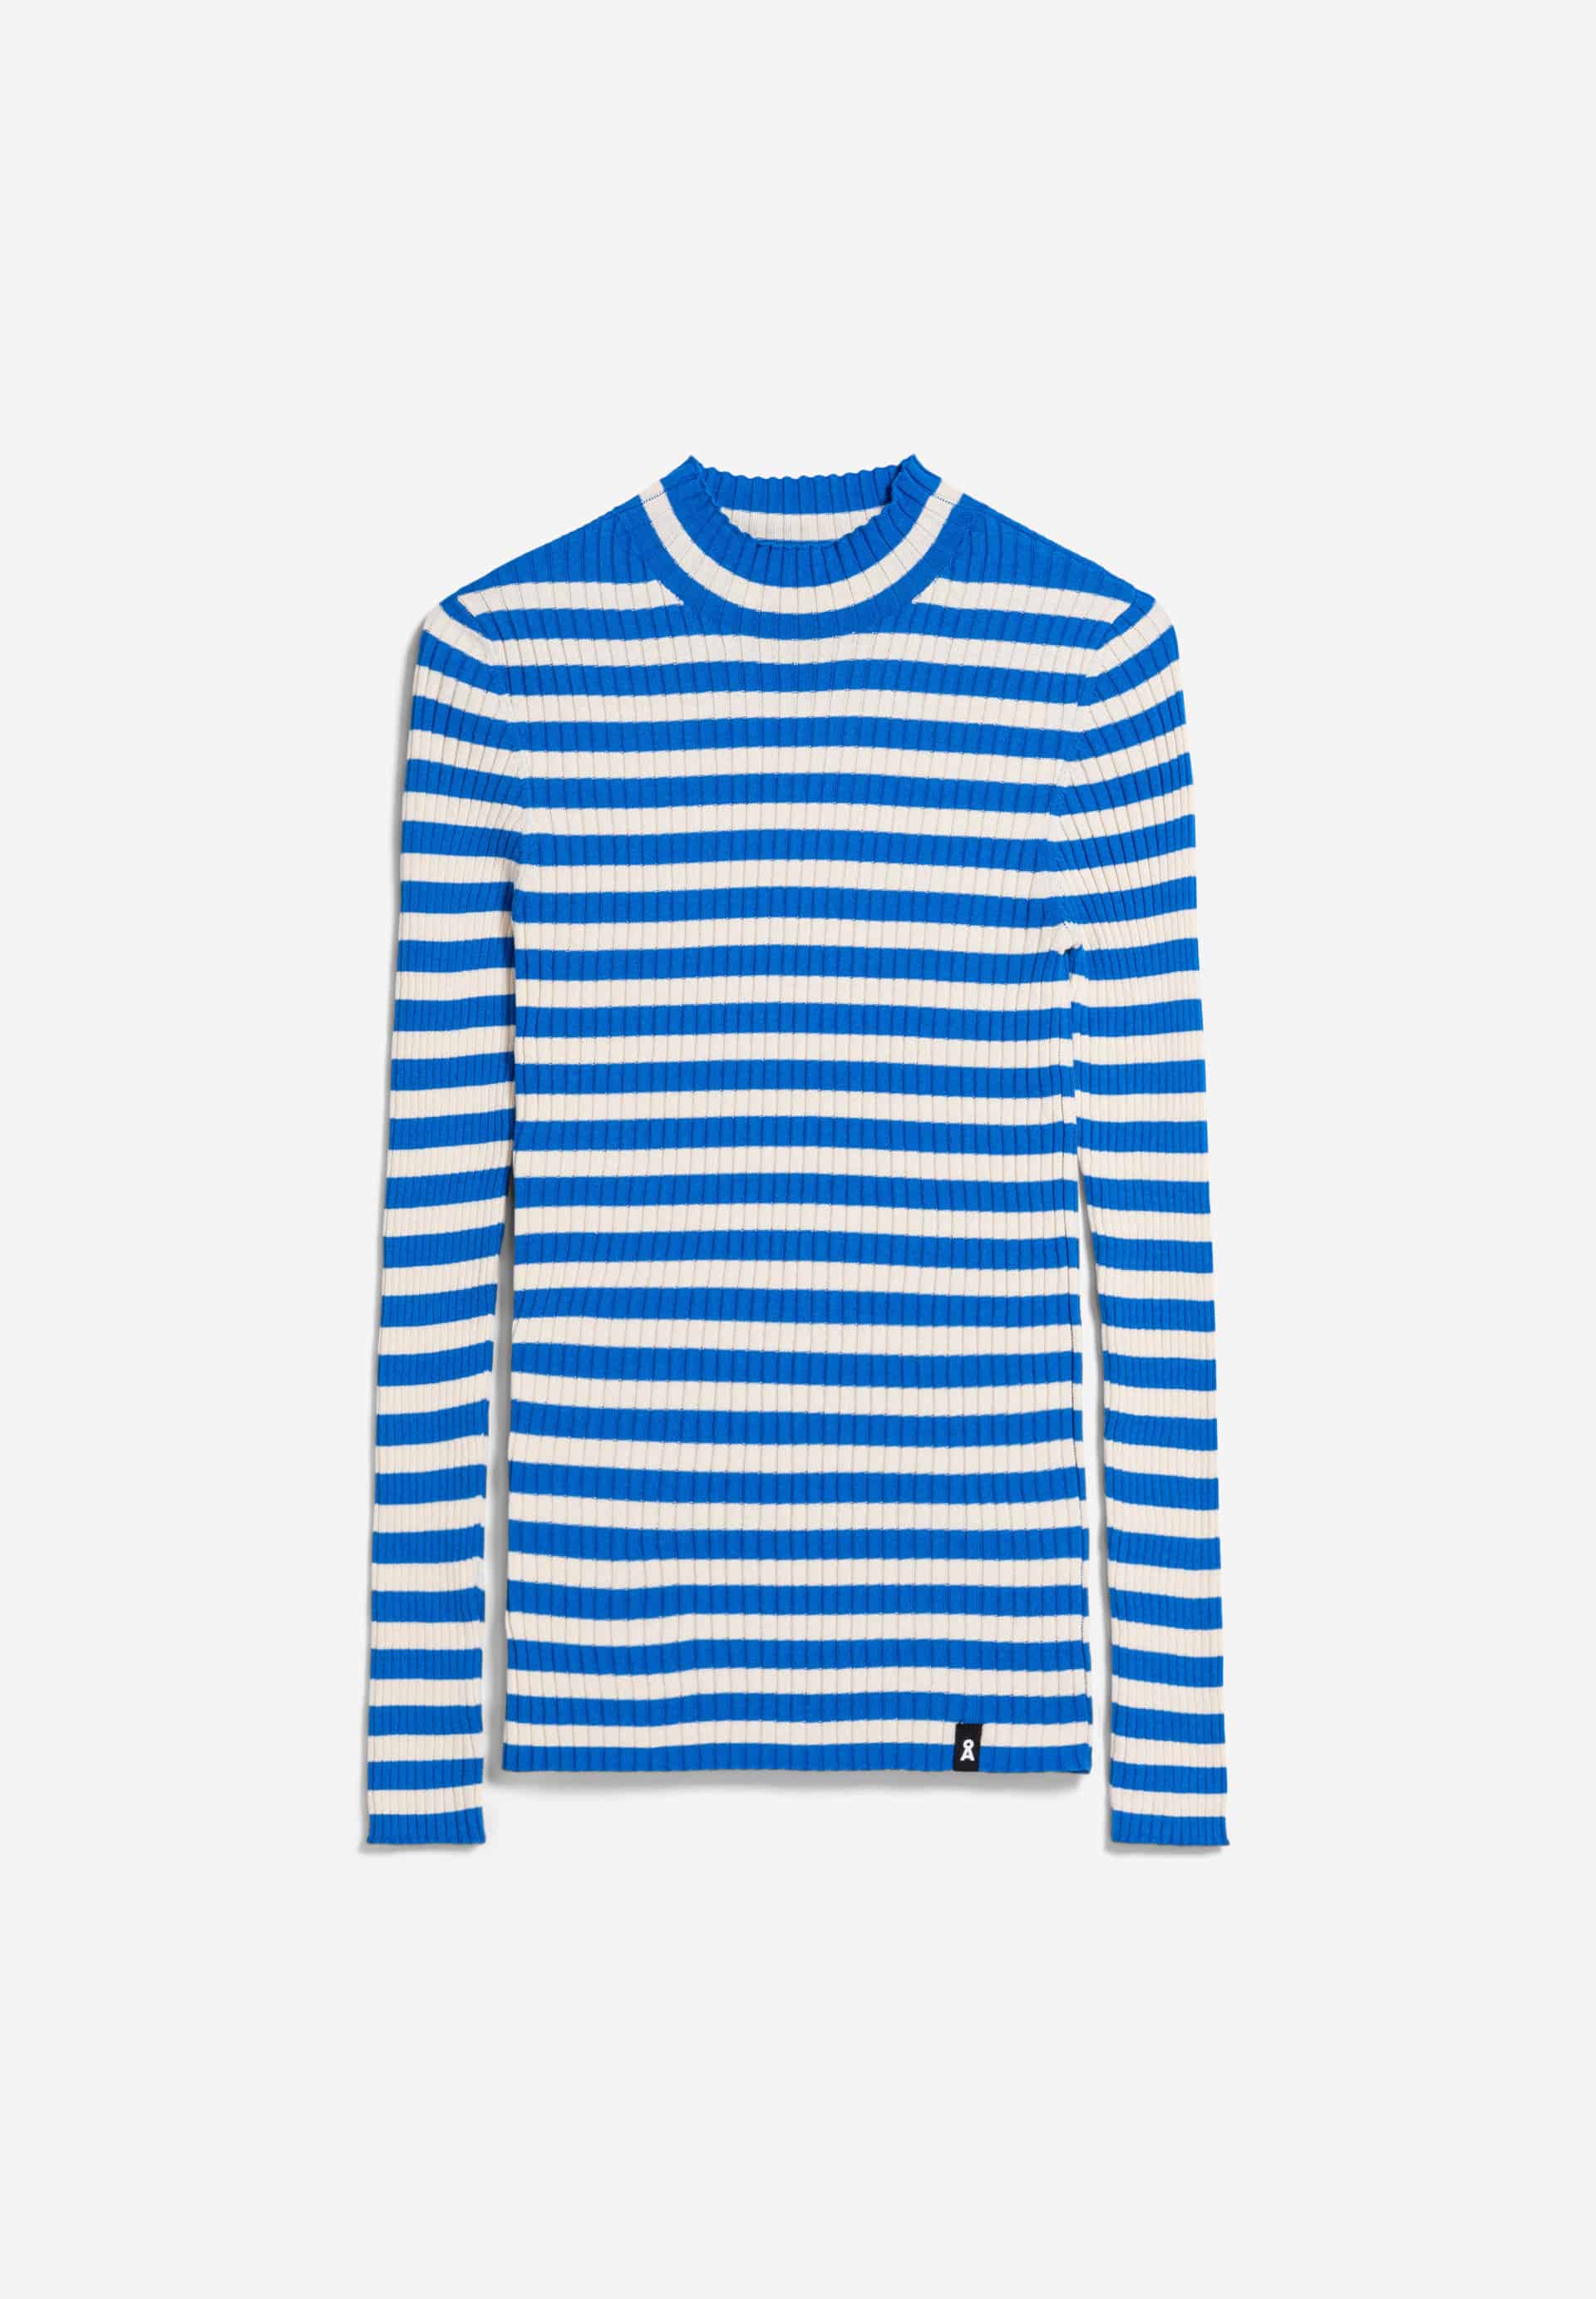 ALAANIA STRIPED Sweater Slim Fit made of Organic Cotton